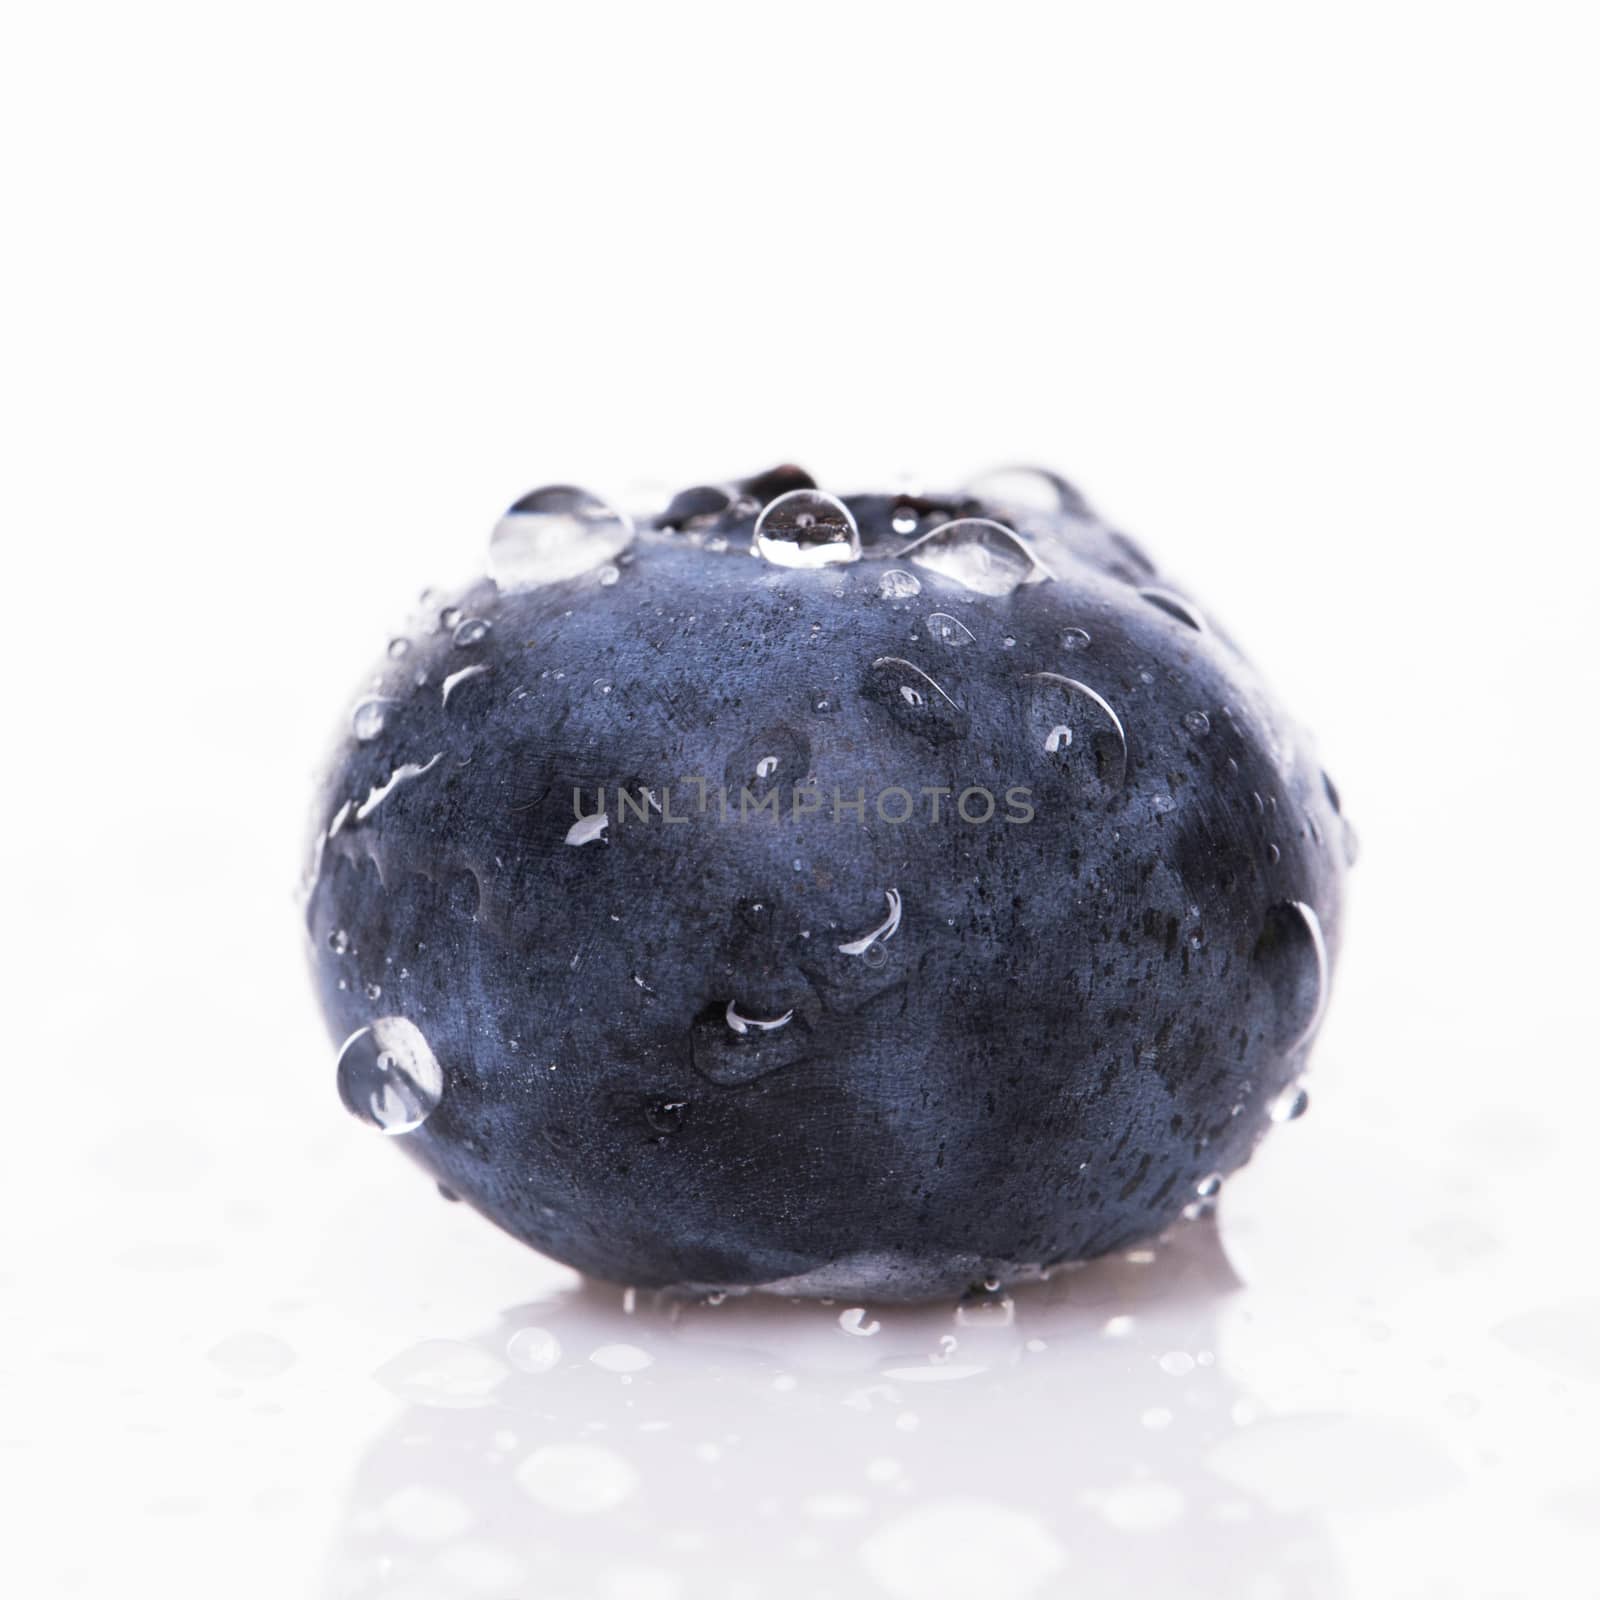 Closeup picture of a wet blueberry